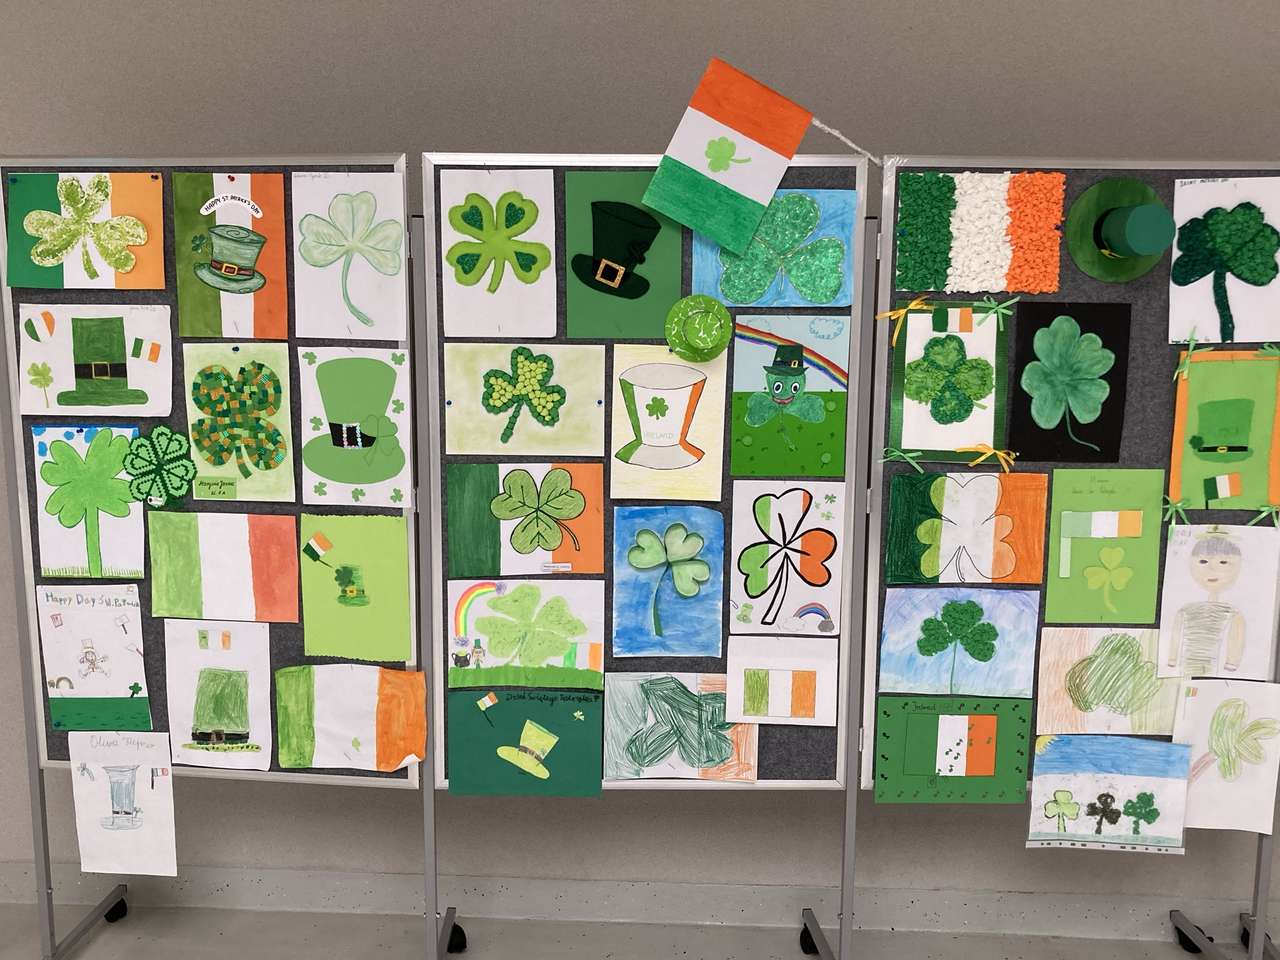 St. Patrick's Day at our school puzzle online